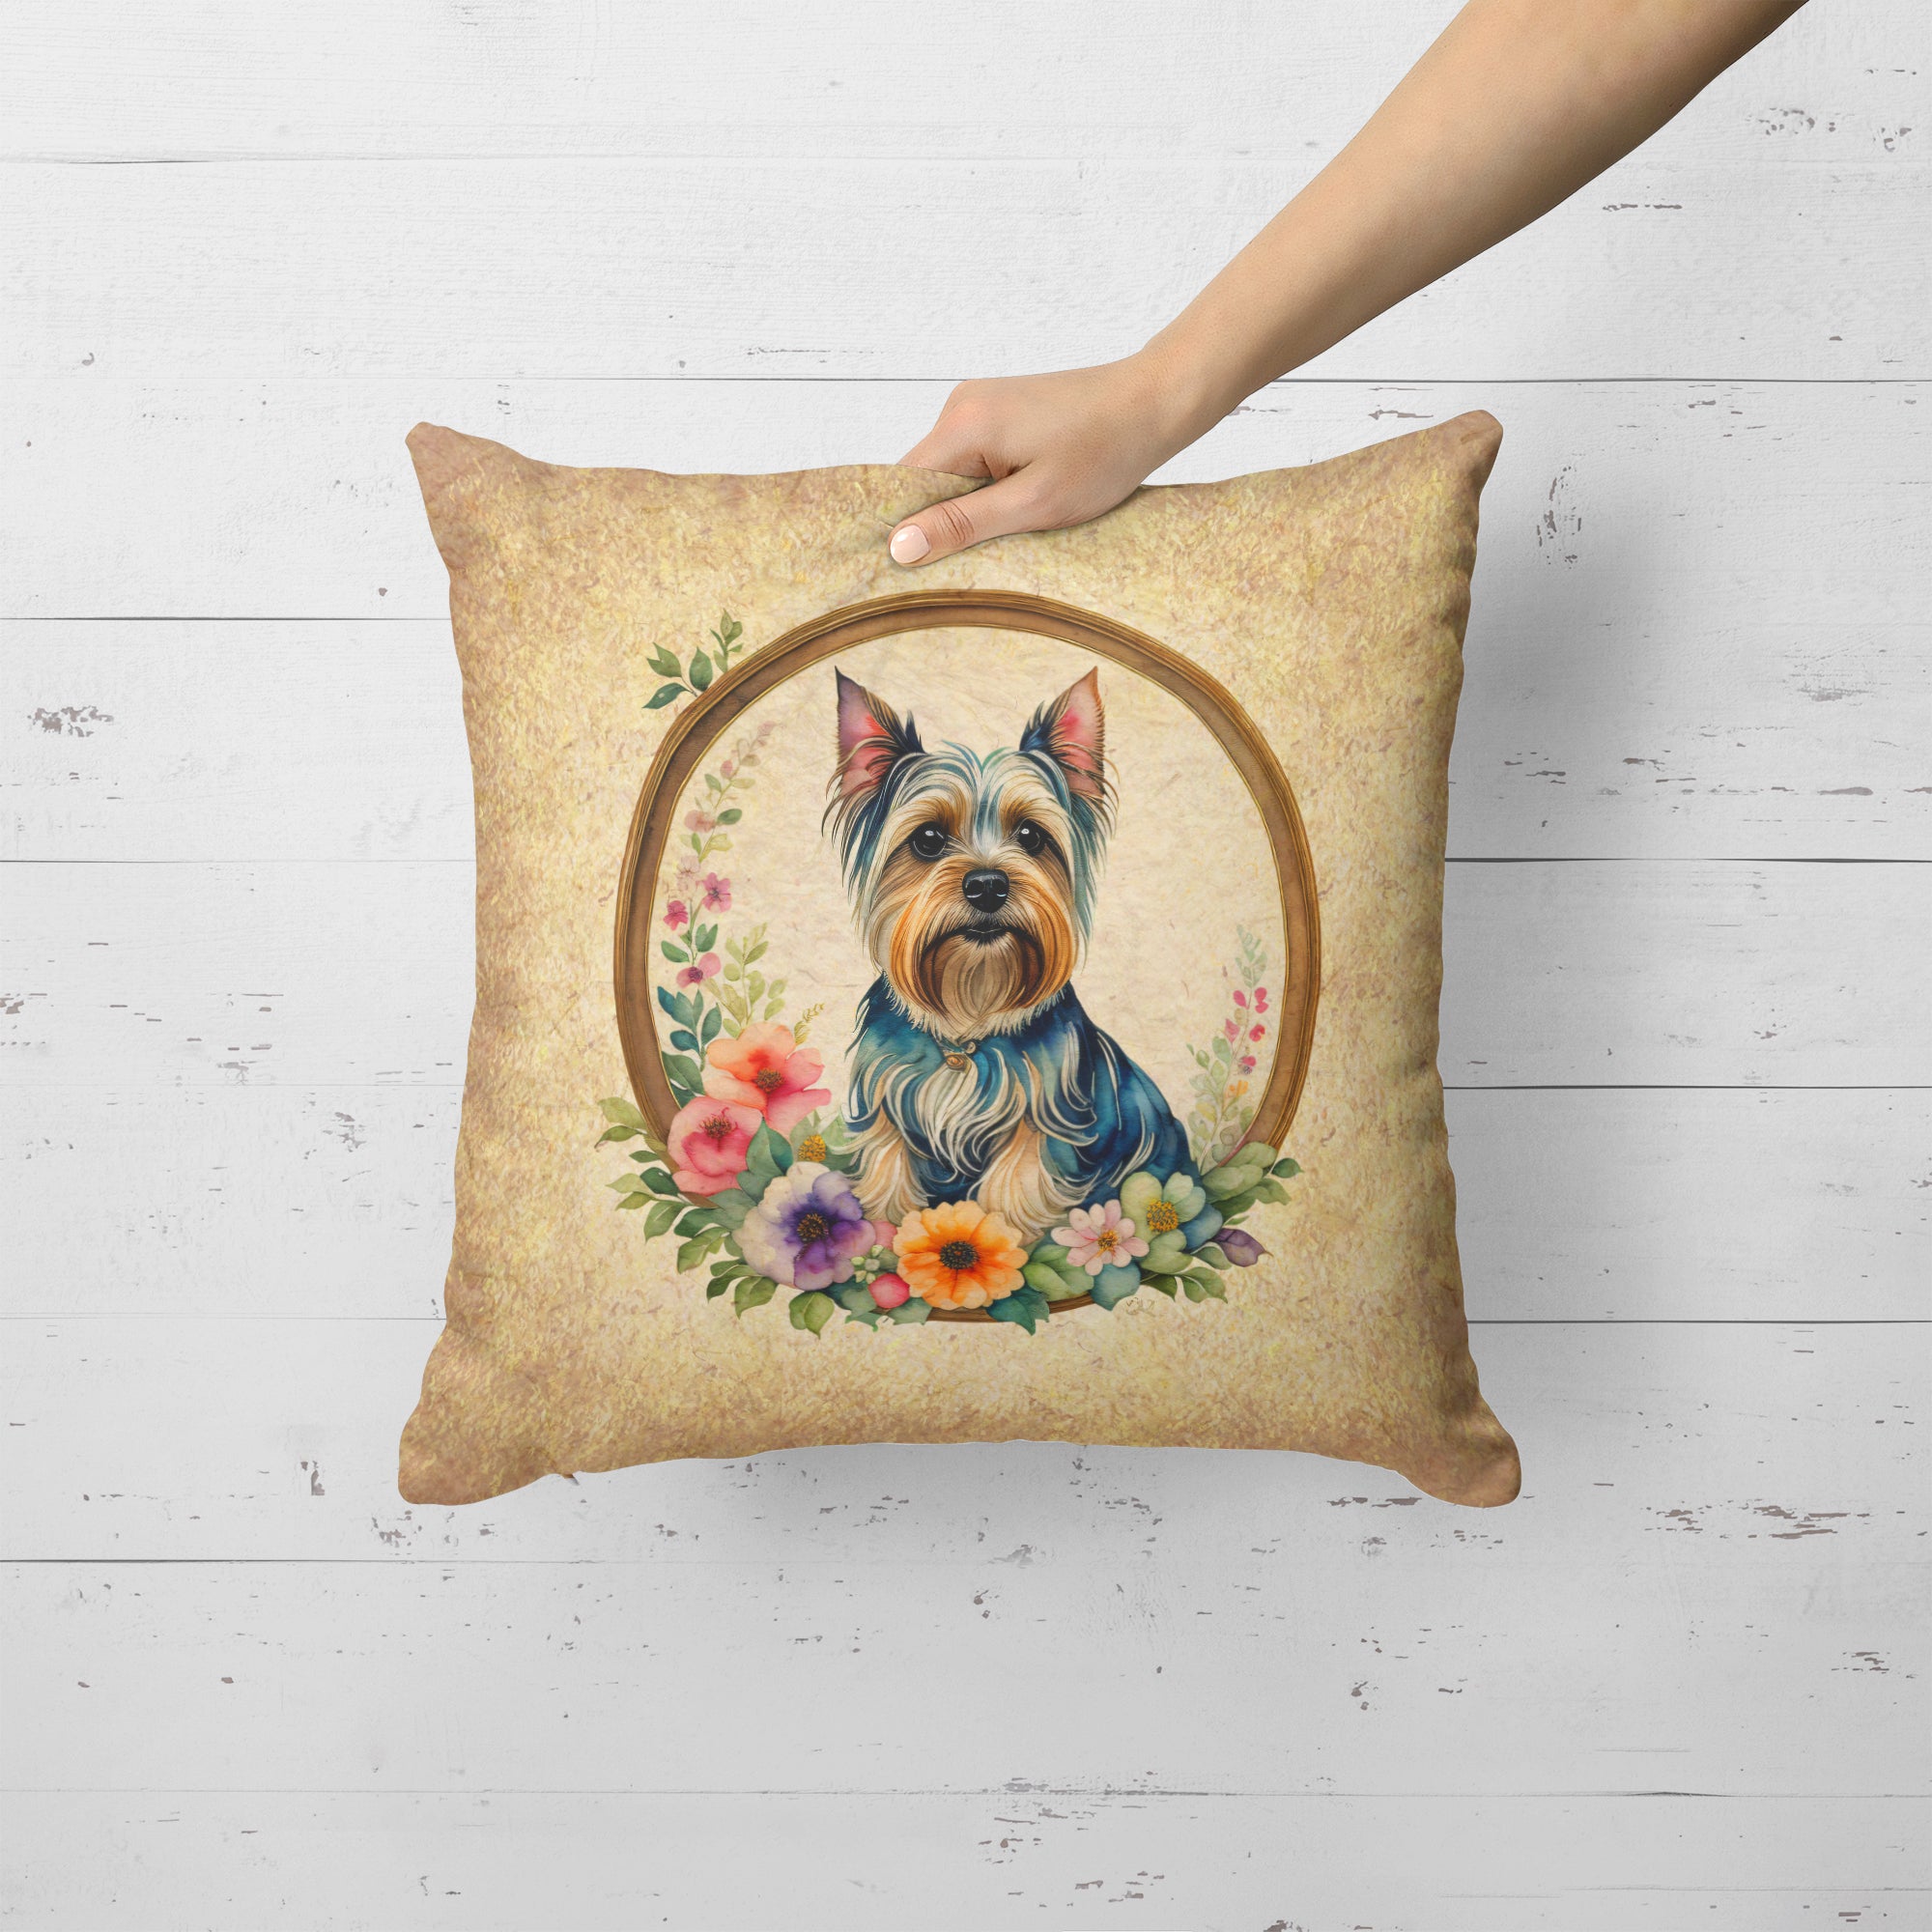 Buy this Silky Terrier and Flowers Fabric Decorative Pillow